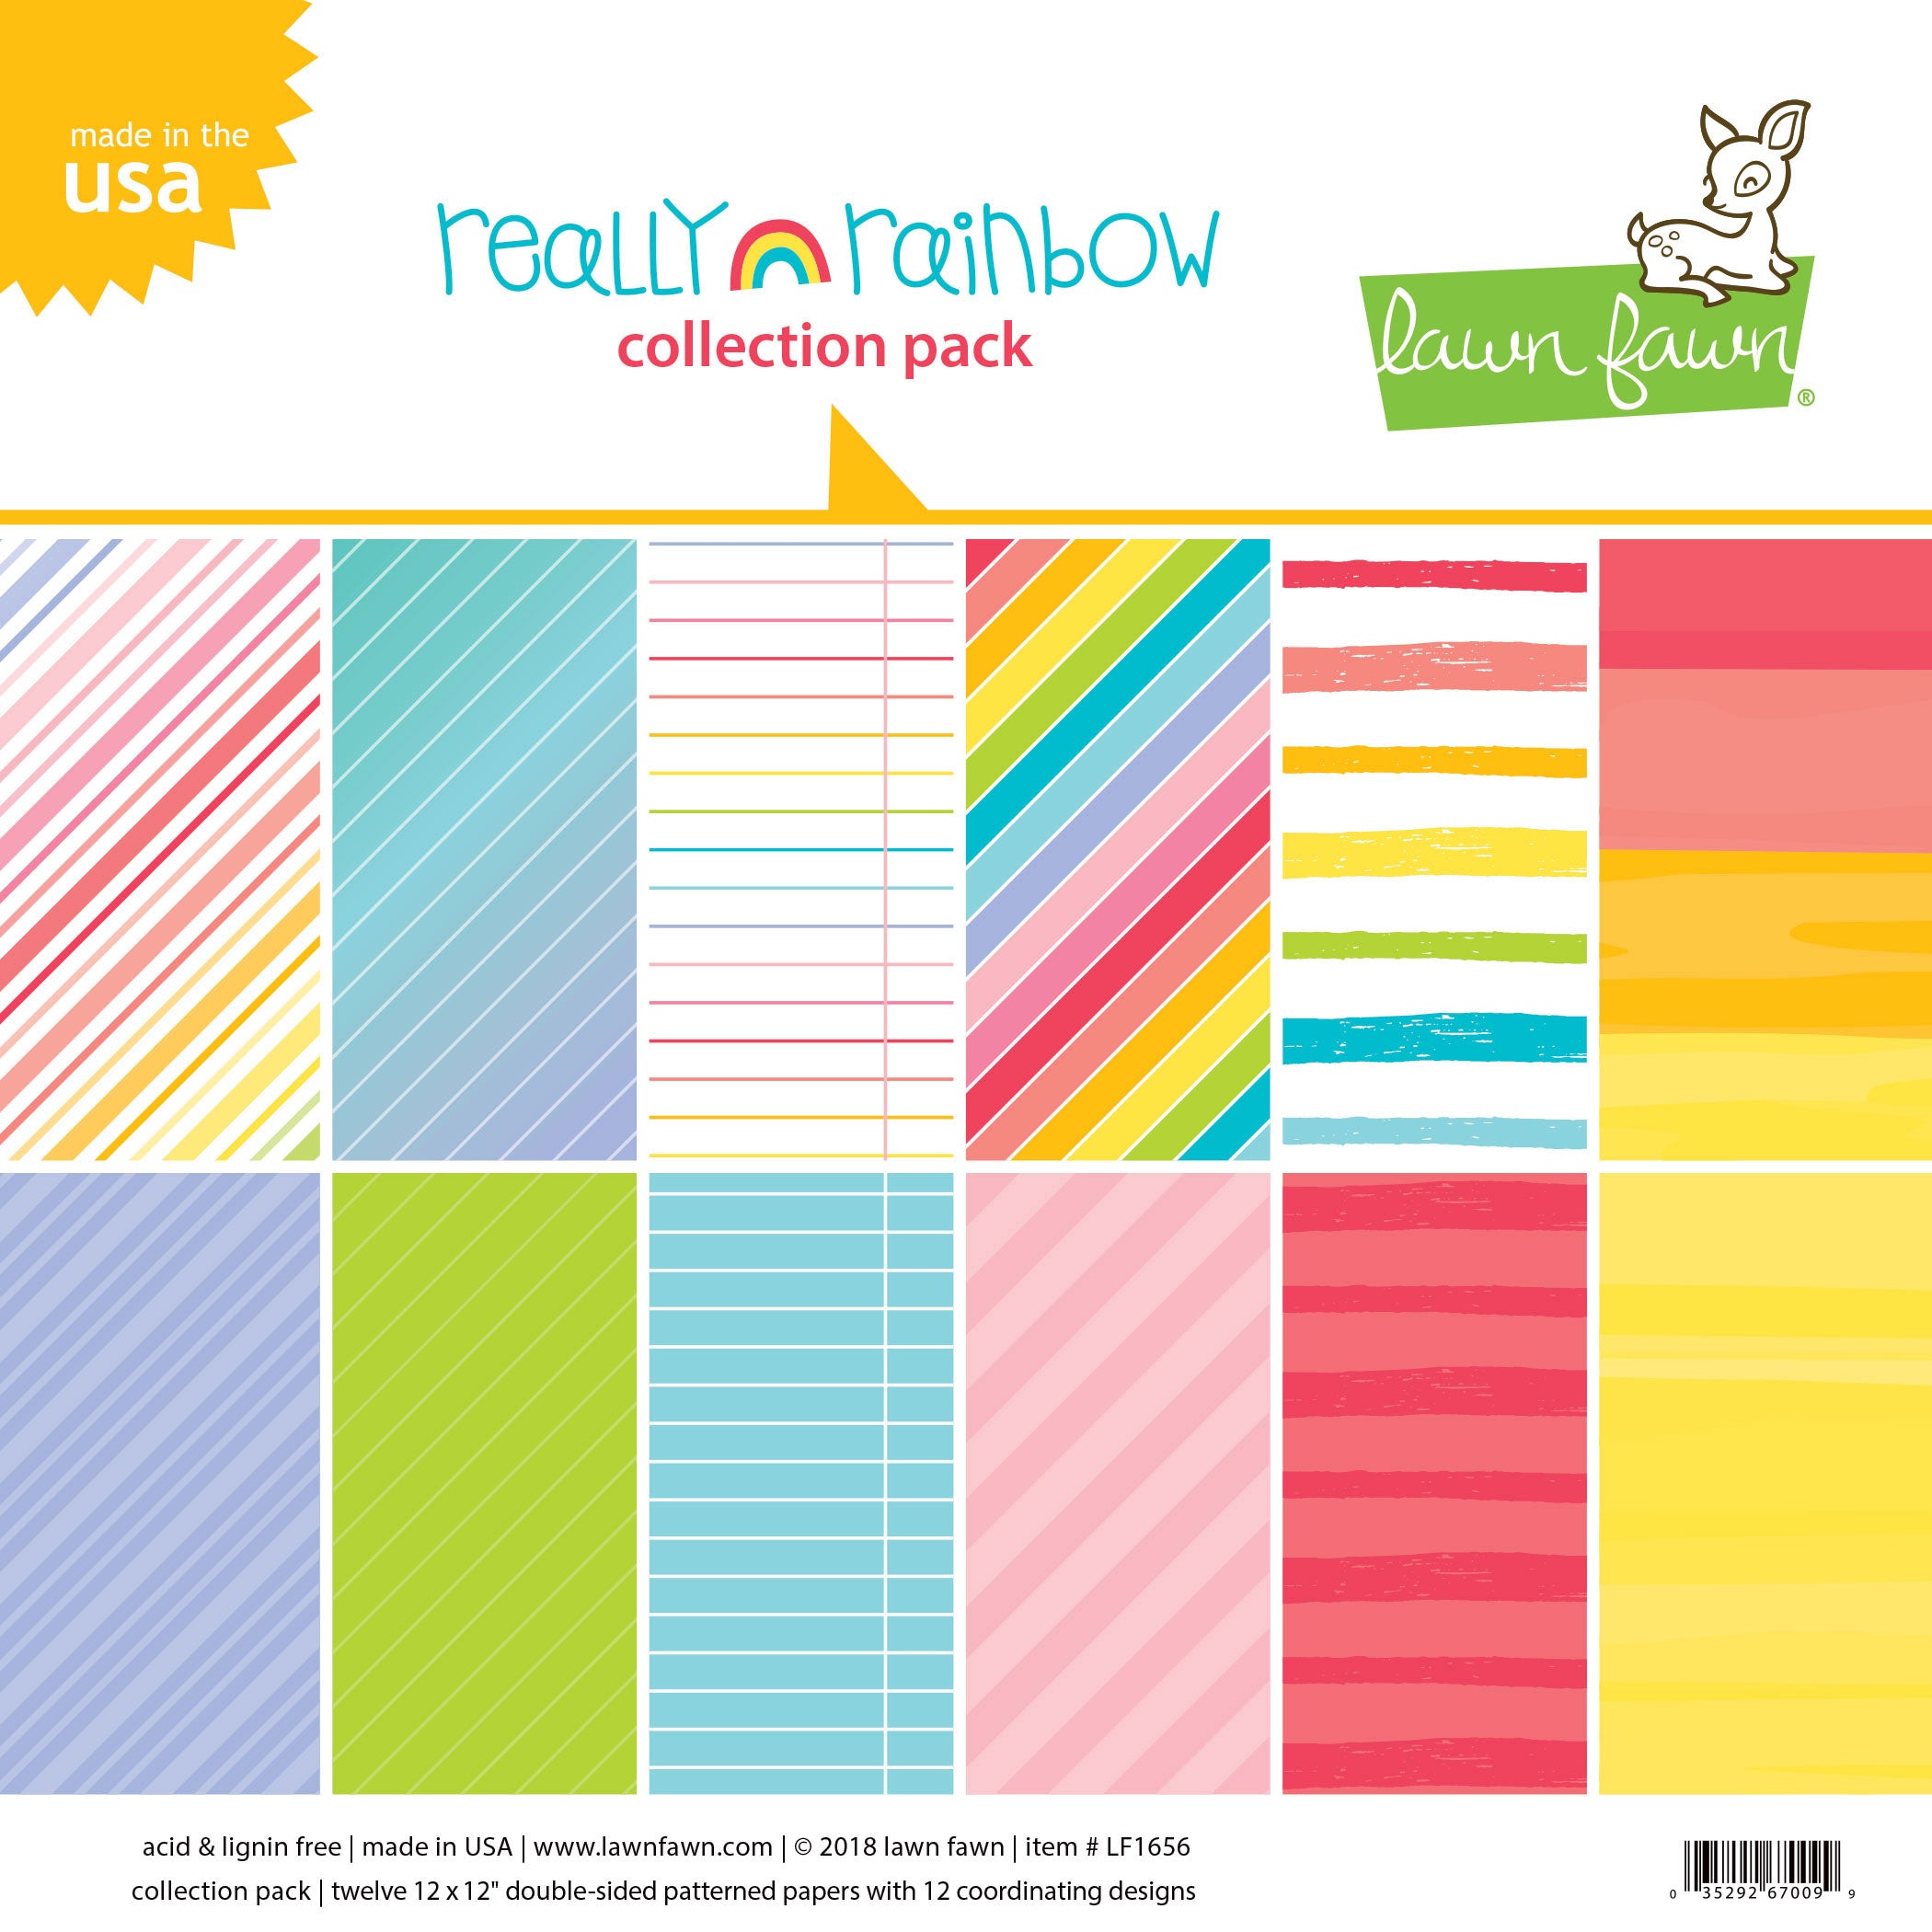 really rainbow collection pack